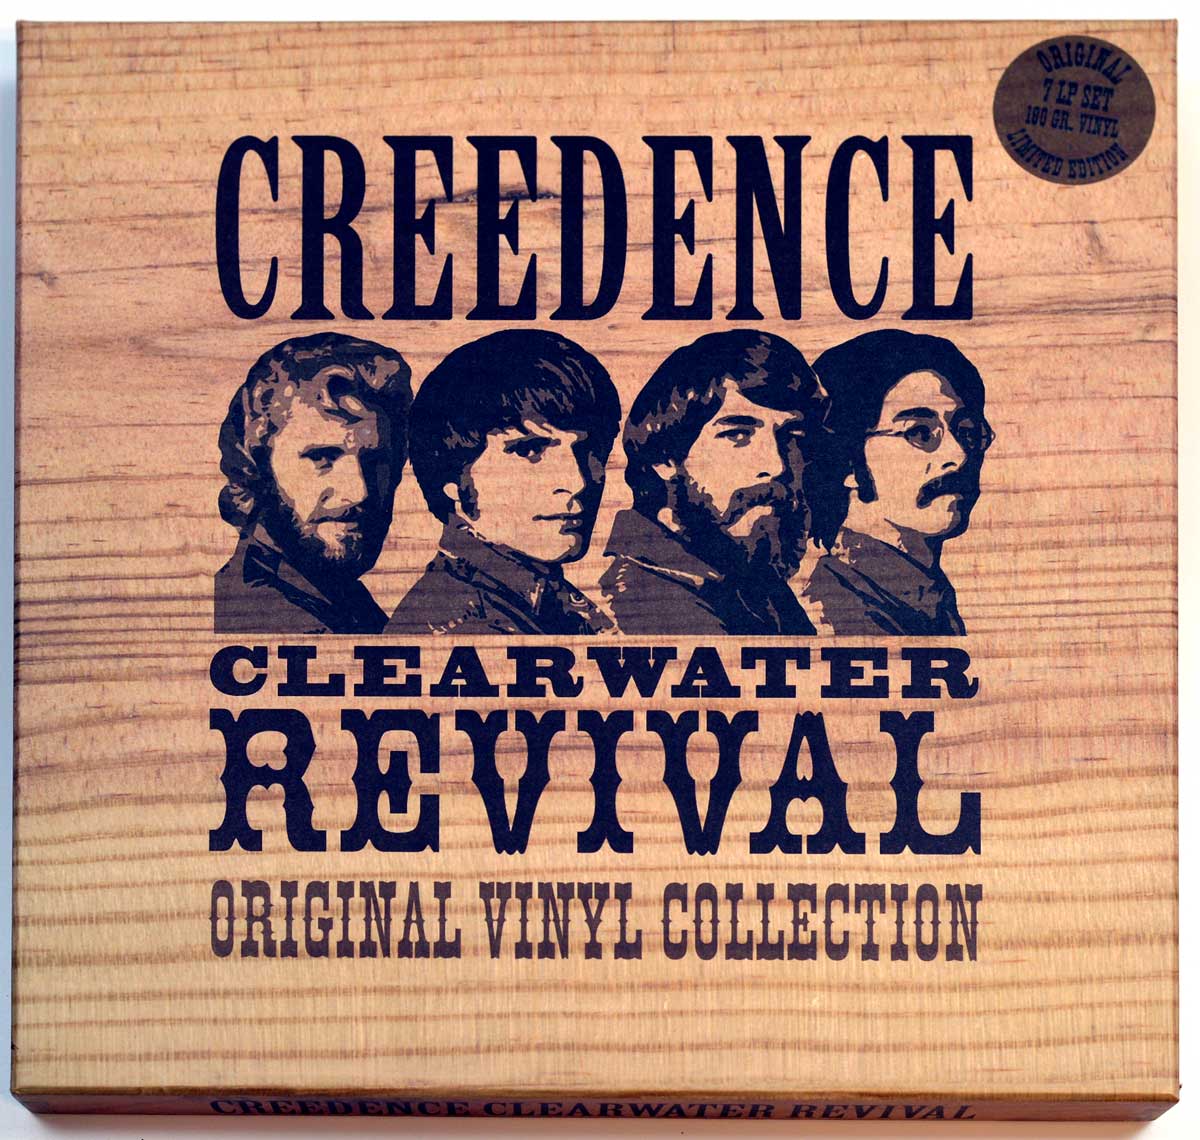 large album front cover photo of: CCR Creedence Clearwater Revival Original Vinyl Collection 